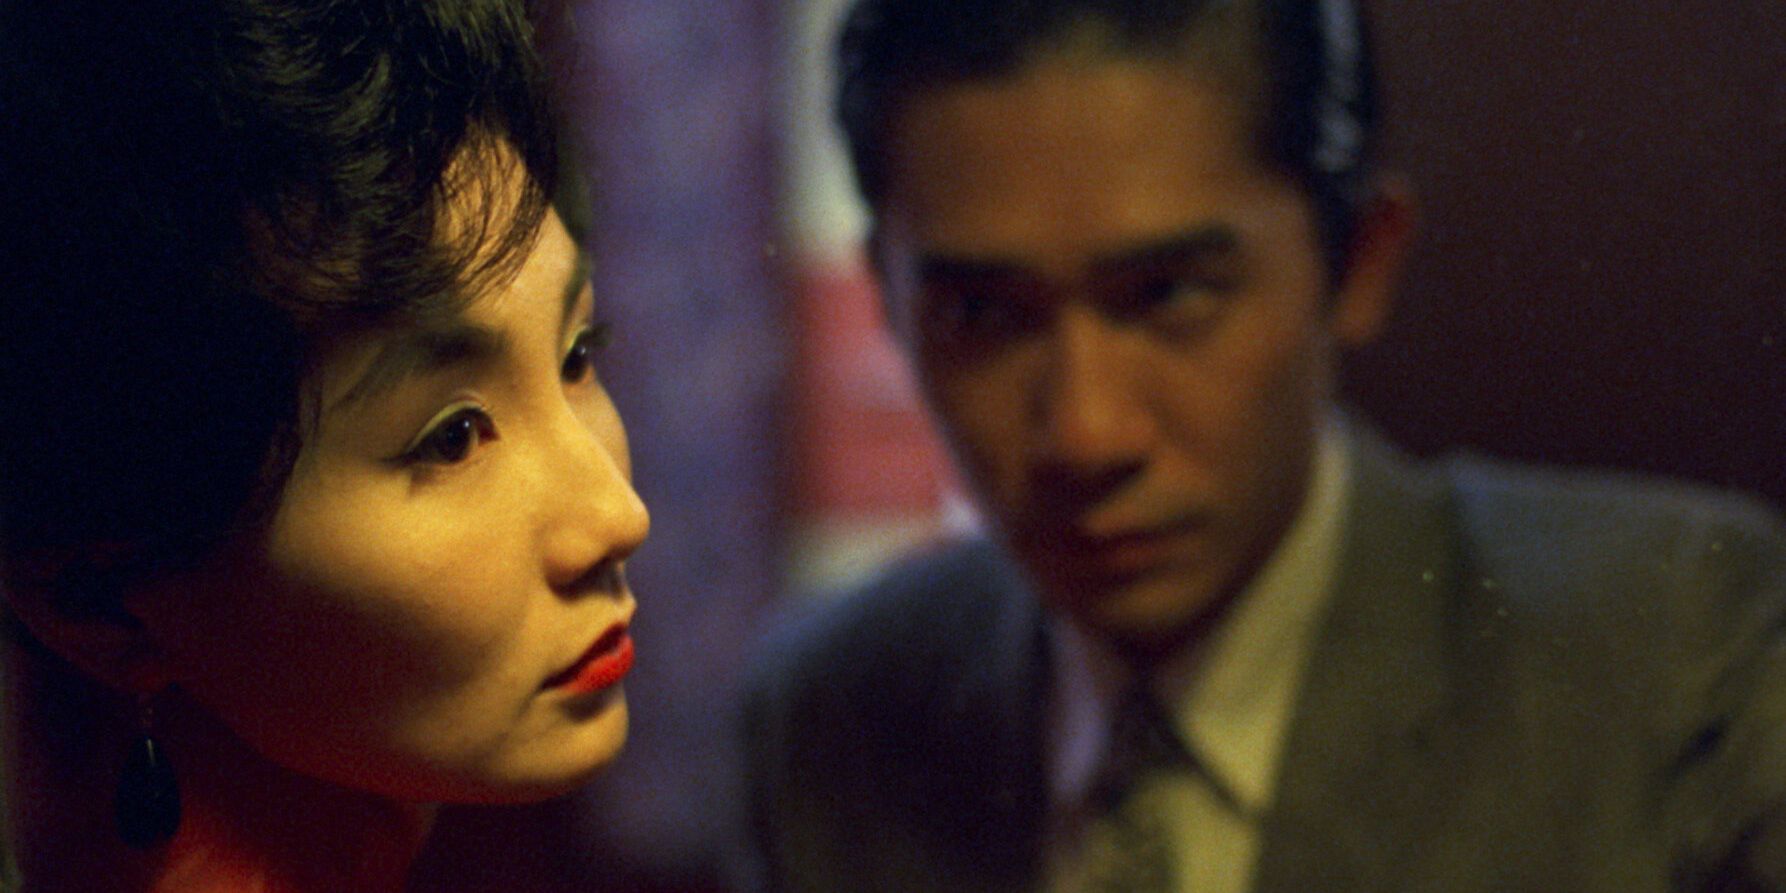 Tony Leung looking intently at Maggie Cheung in Wong Kar-wai's In the Mood For Love.